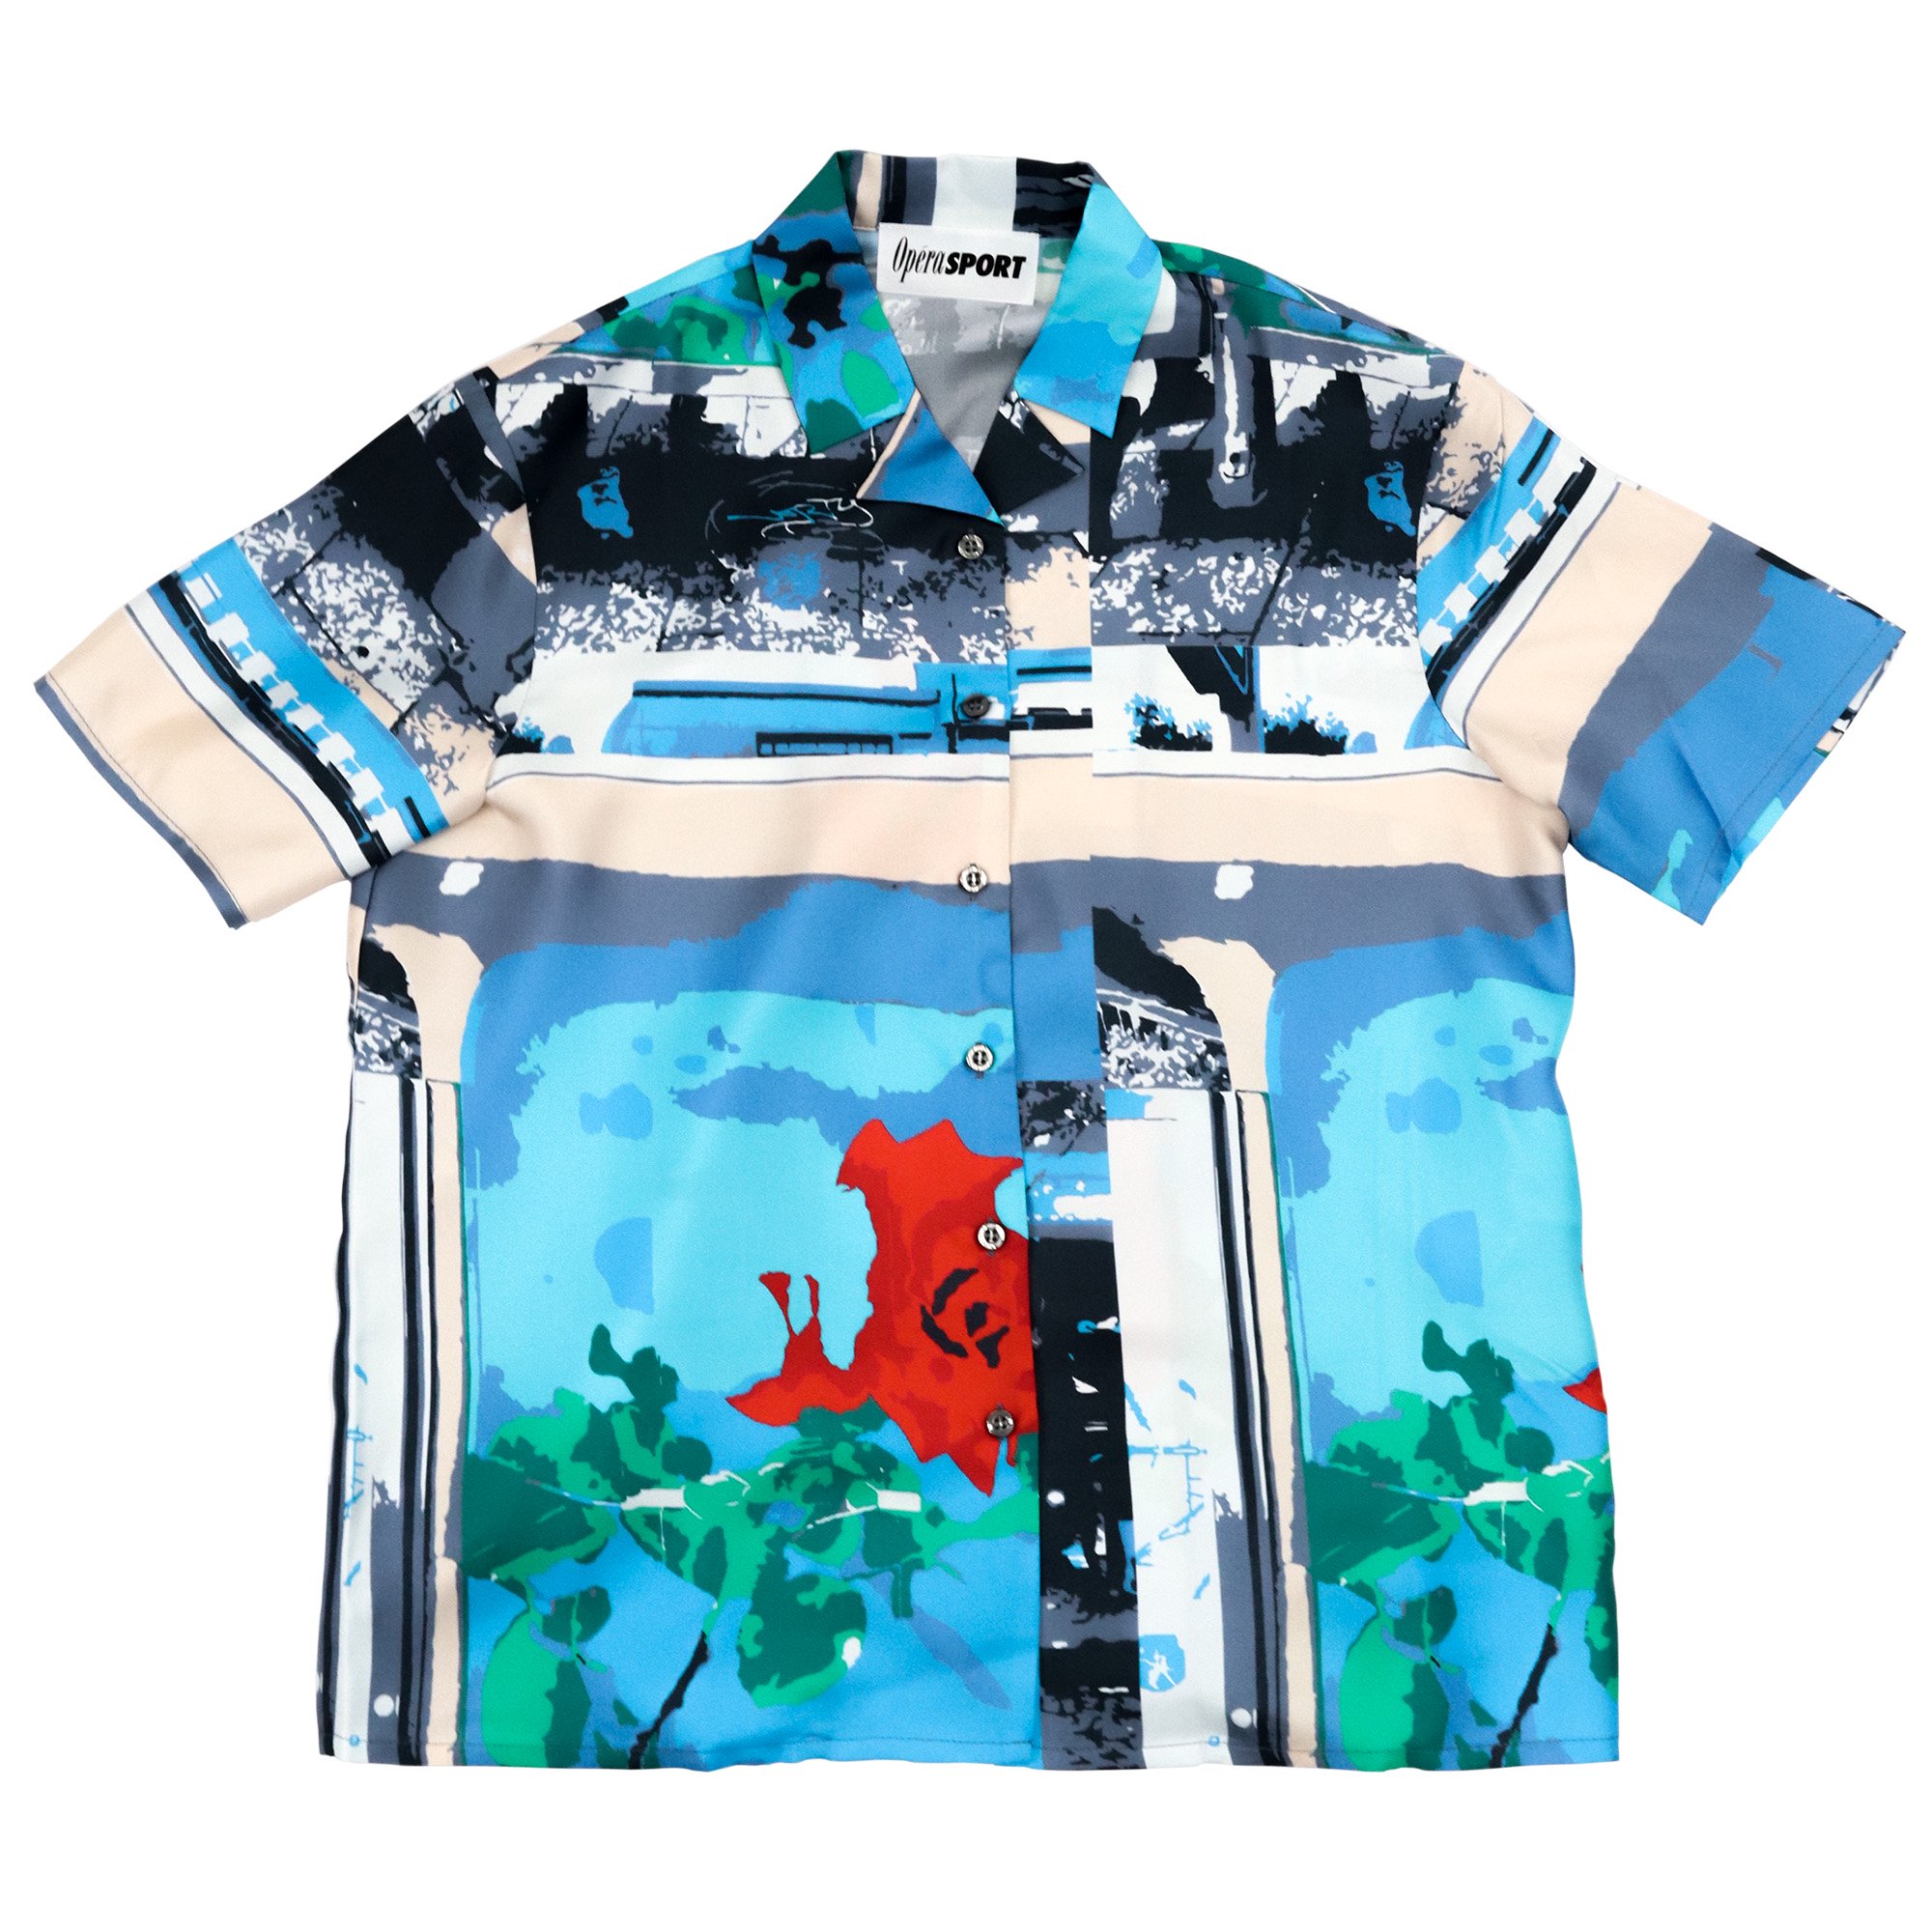 <img class='new_mark_img1' src='https://img.shop-pro.jp/img/new/icons6.gif' style='border:none;display:inline;margin:0px;padding:0px;width:auto;' />OPERASPORT PRINT SHIRT【MULTI COLOR】